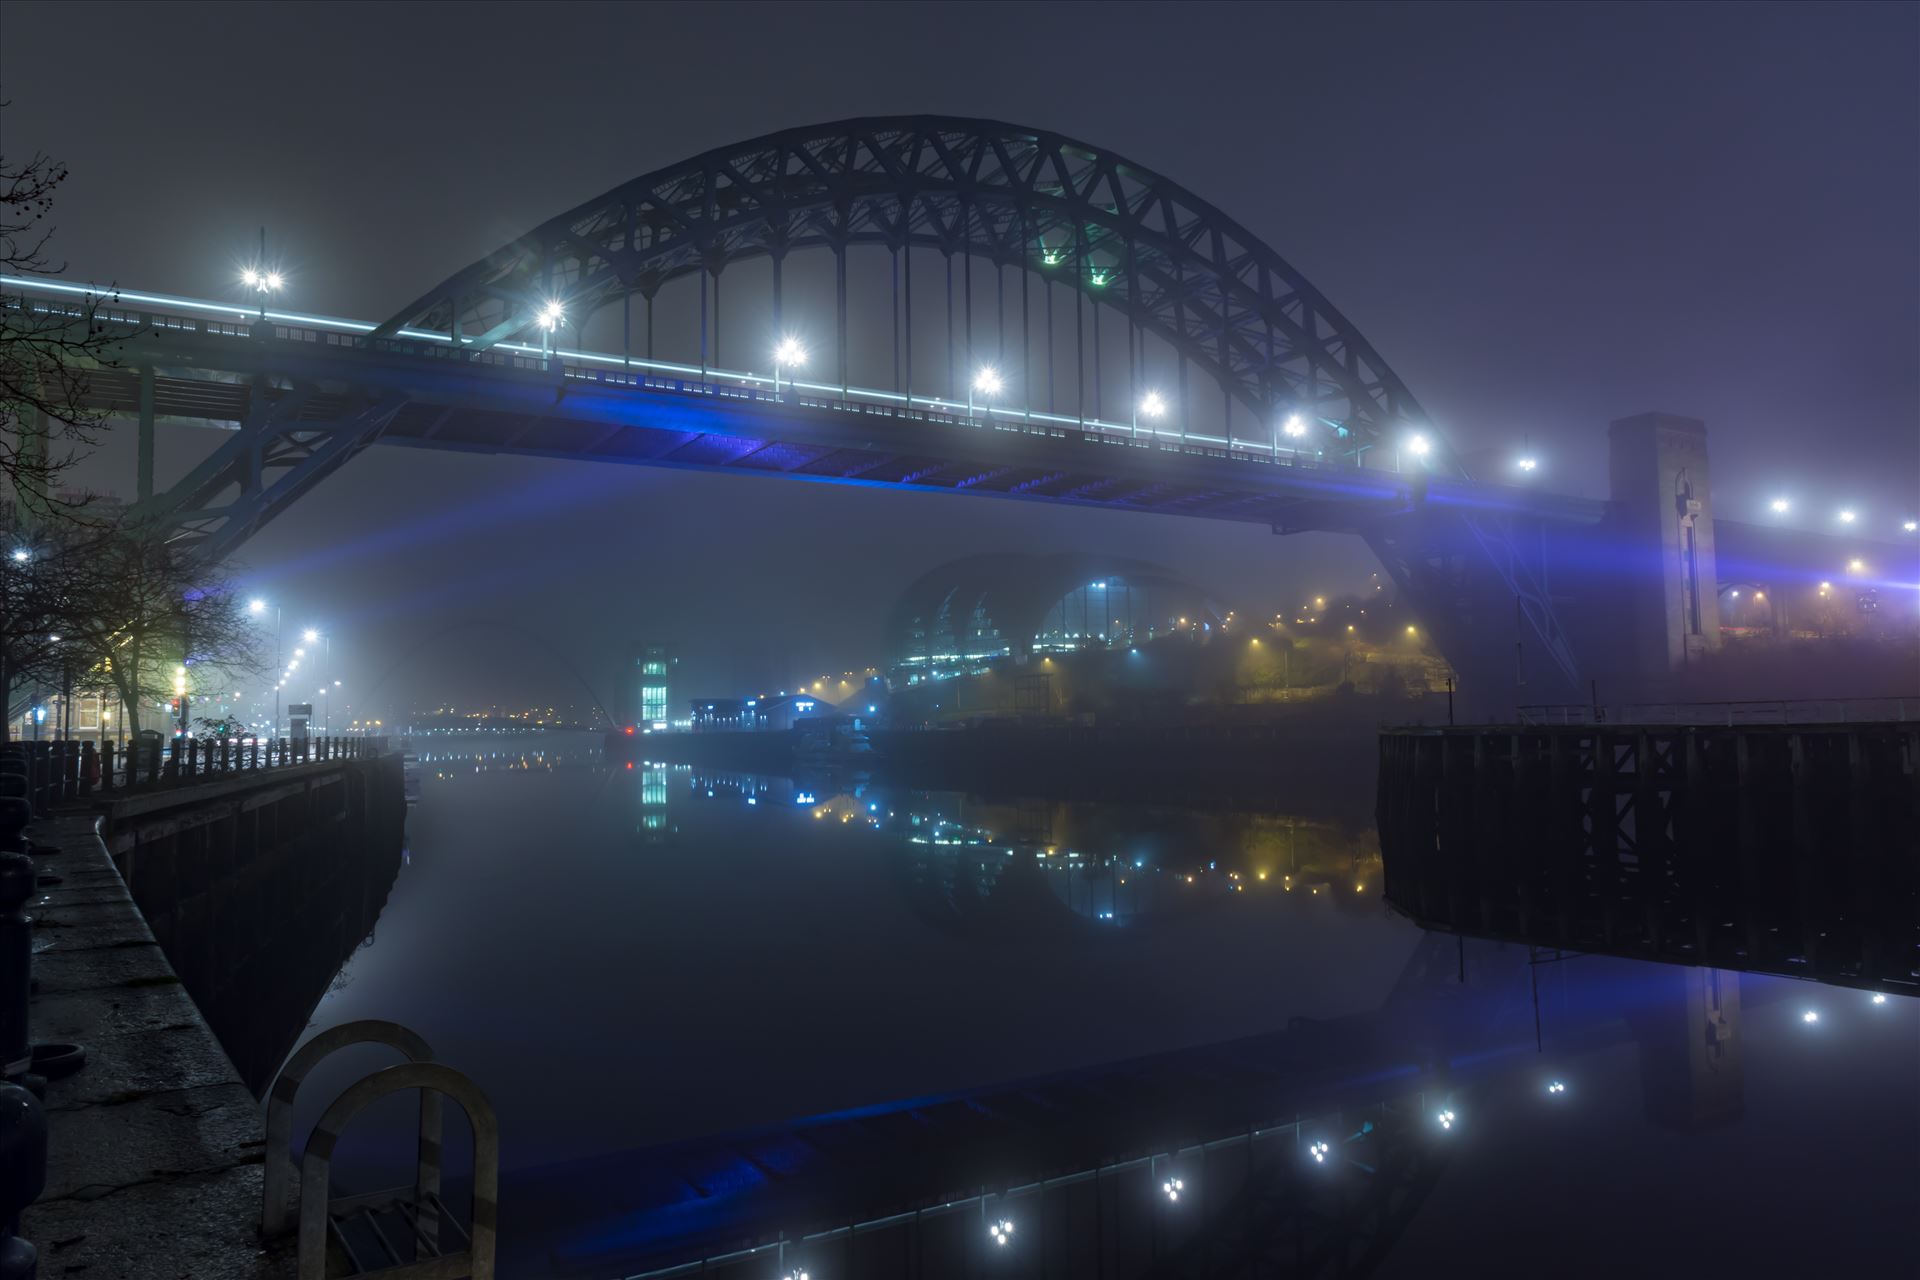 Fog on the Tyne 2 - Shot on the quayside at Newcastle early one foggy morning by philreay